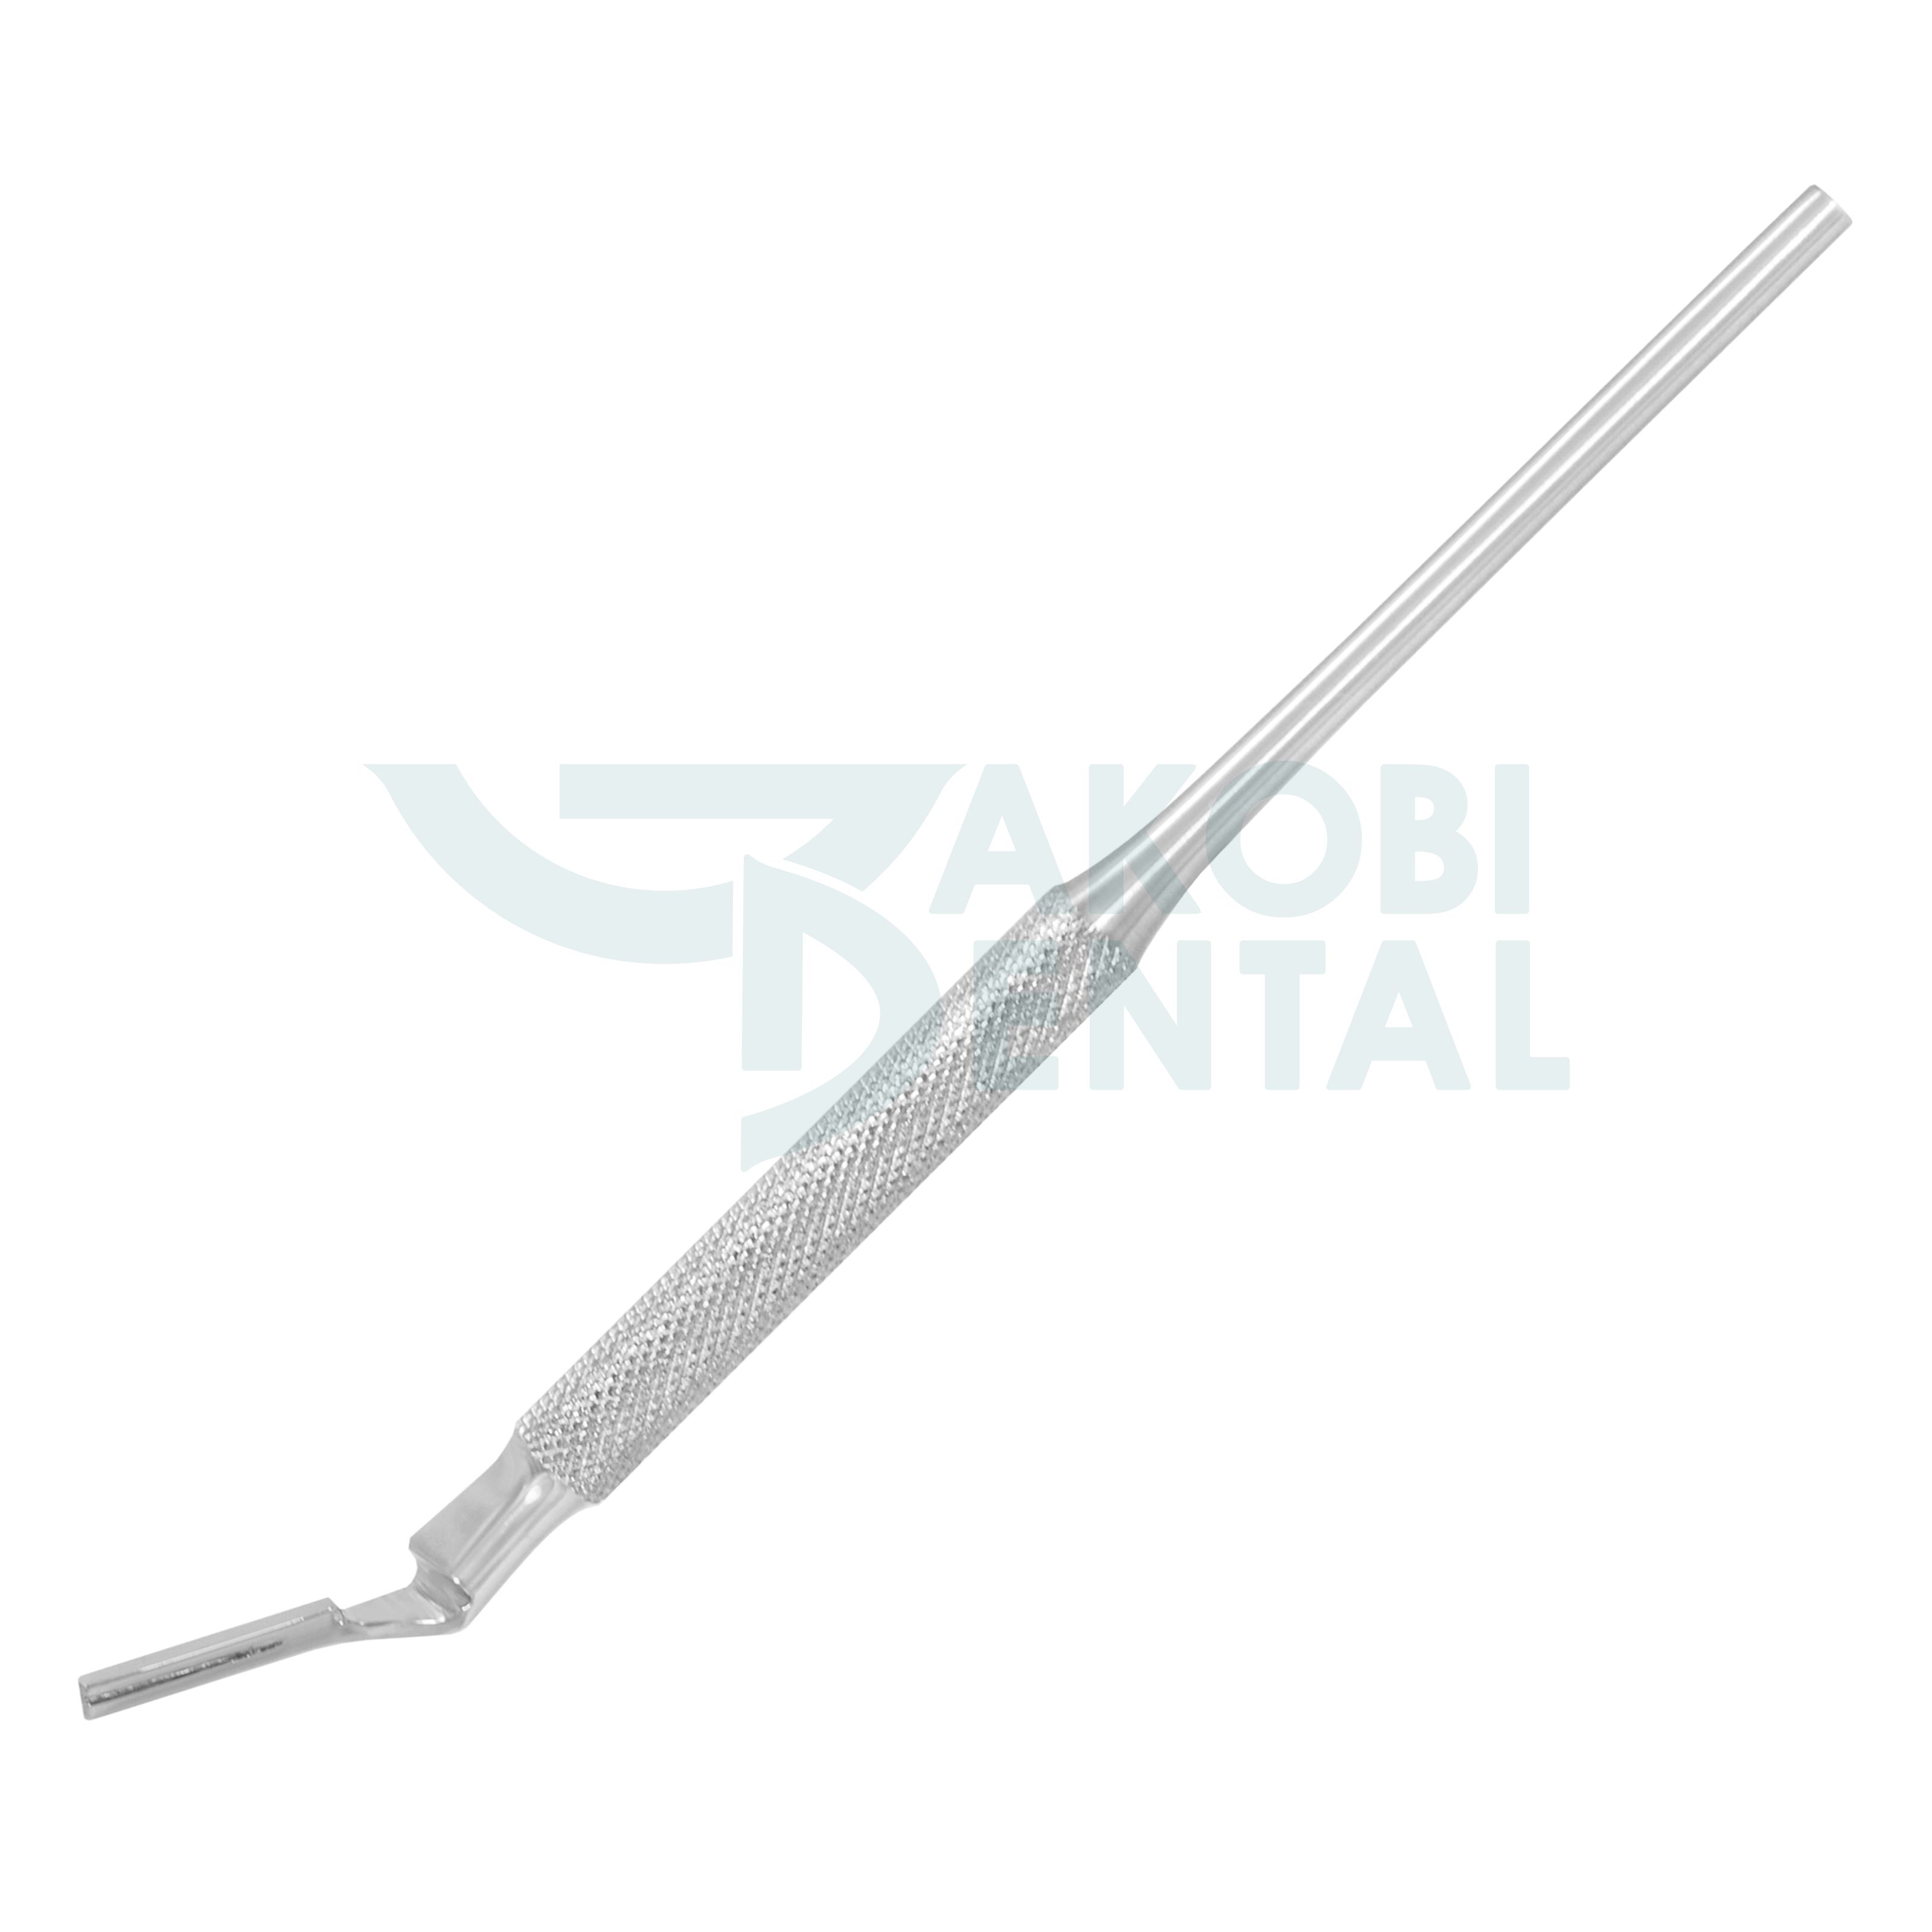 Scalpel handle # 05A, round, angled, 145mm